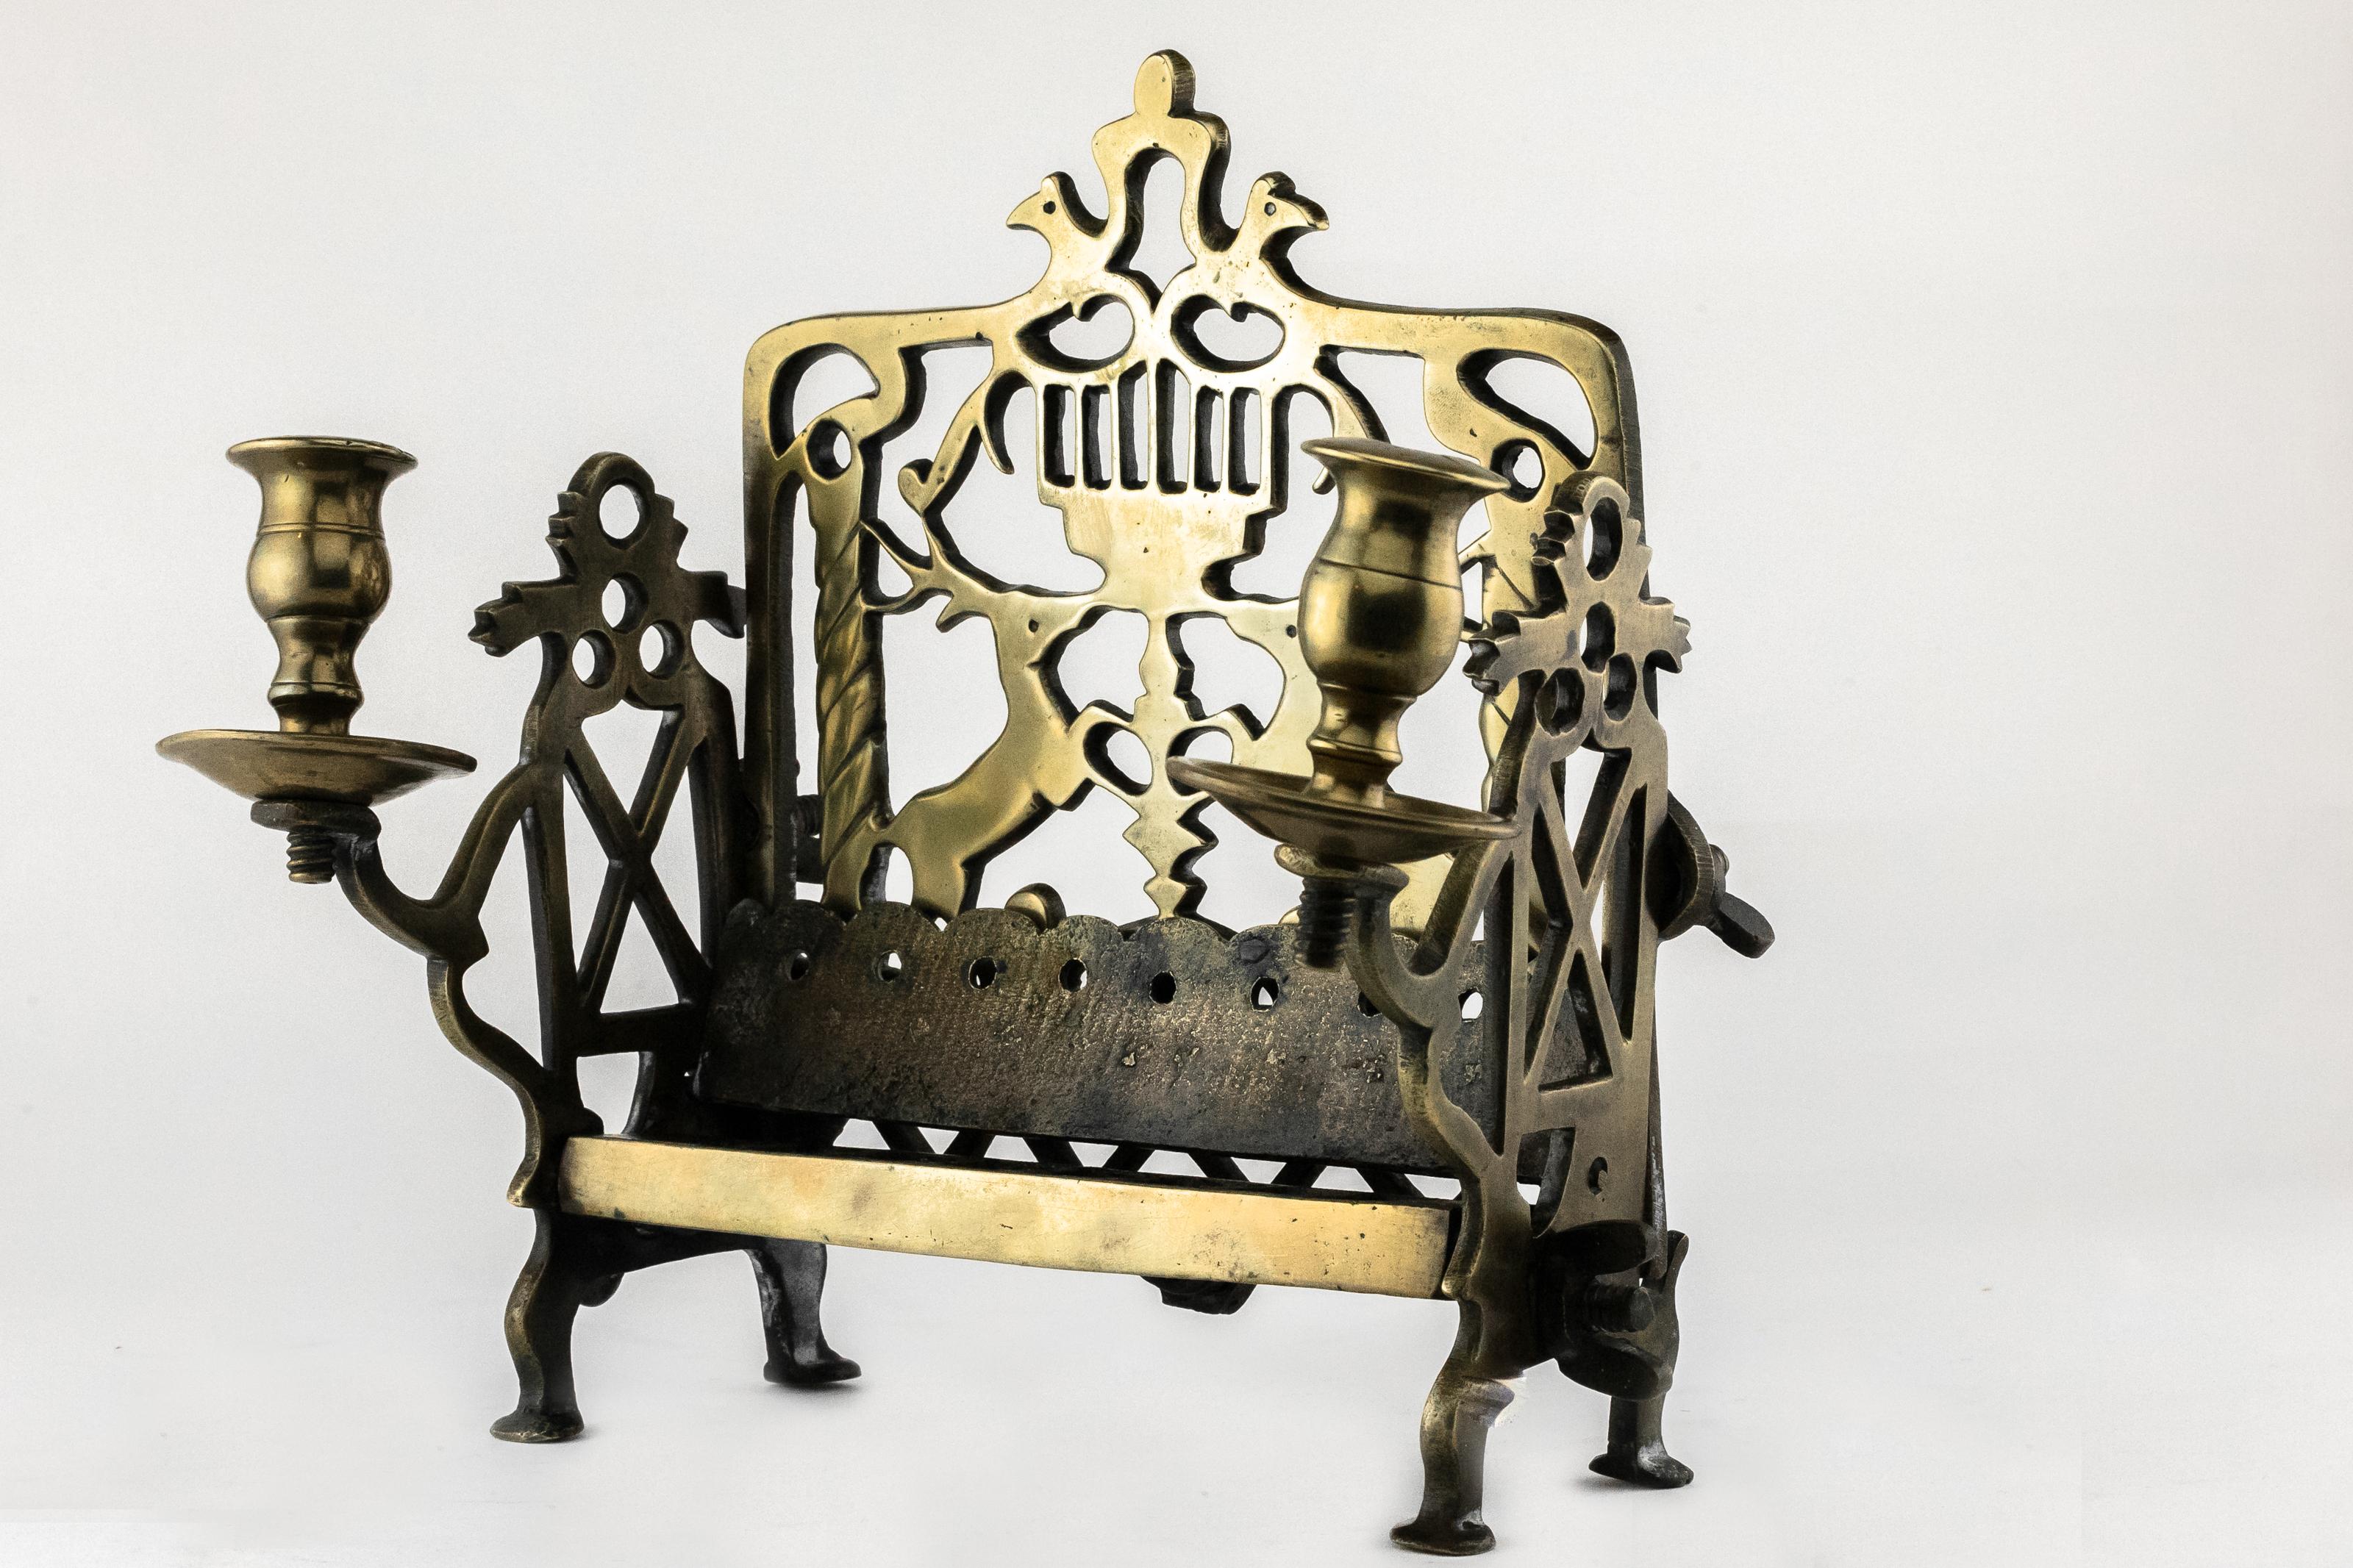 Brass Hanukkah Lamp, Poland, 18th century.
Brass, cast, an openwork, rectangular base is screwed onto the sides, raised on four legs, and the back wall. A cuboidal tray, internally divided into eight cube-shaped burners, closed with a lid, and